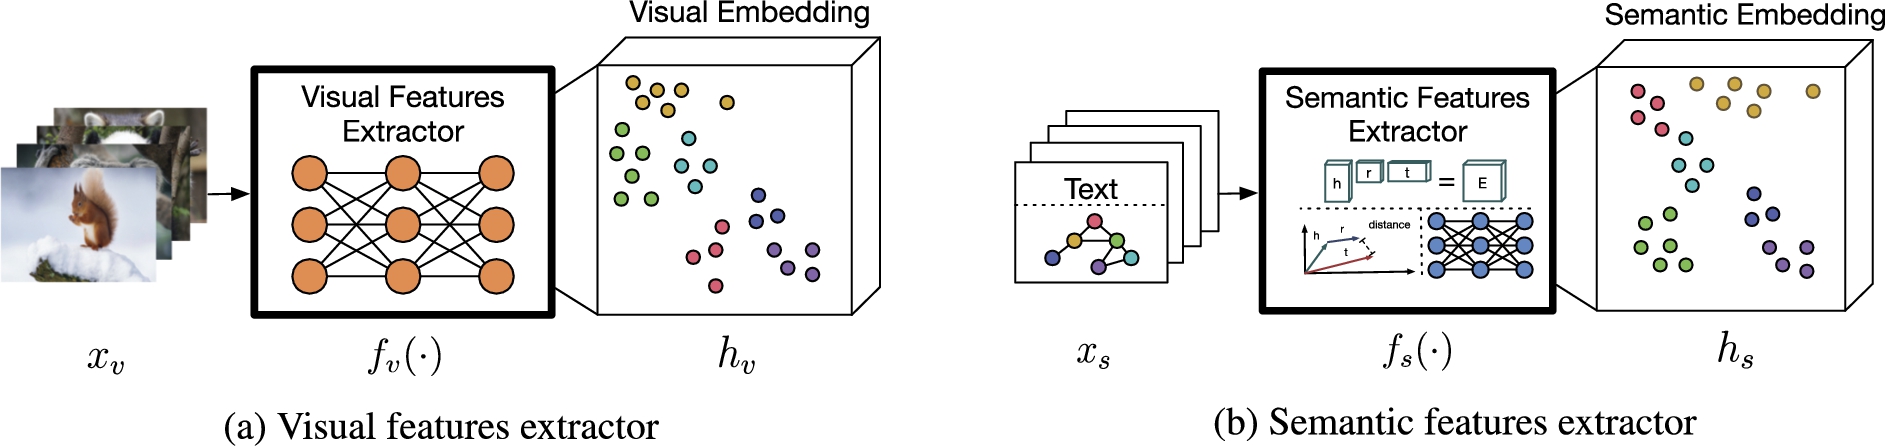 Feature extractors transform input data into embedding space: (a) a visual features extractor transforms visual input data, i.e. images, into visual embedding space; and (b) a semantic features extractor transforms semantic input data, e.g. text or graphs, into semantic embedding space.